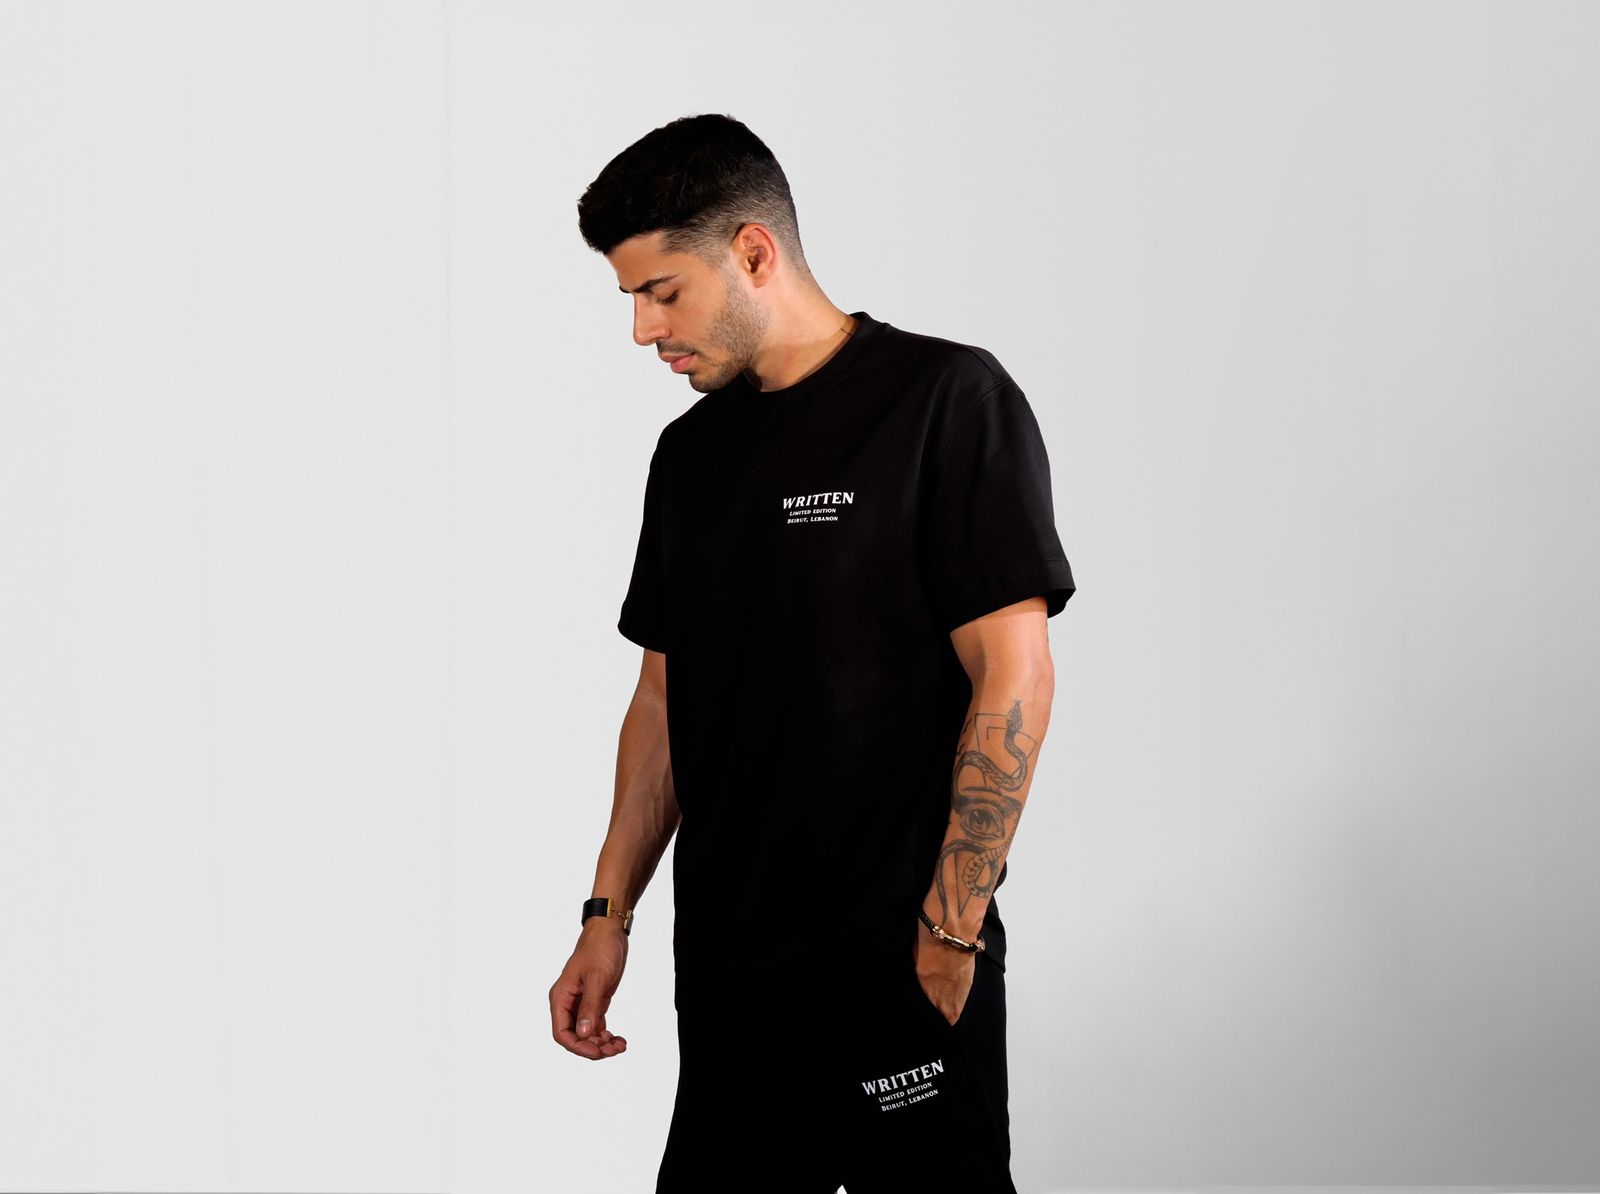 The Black Limited Edition Tee